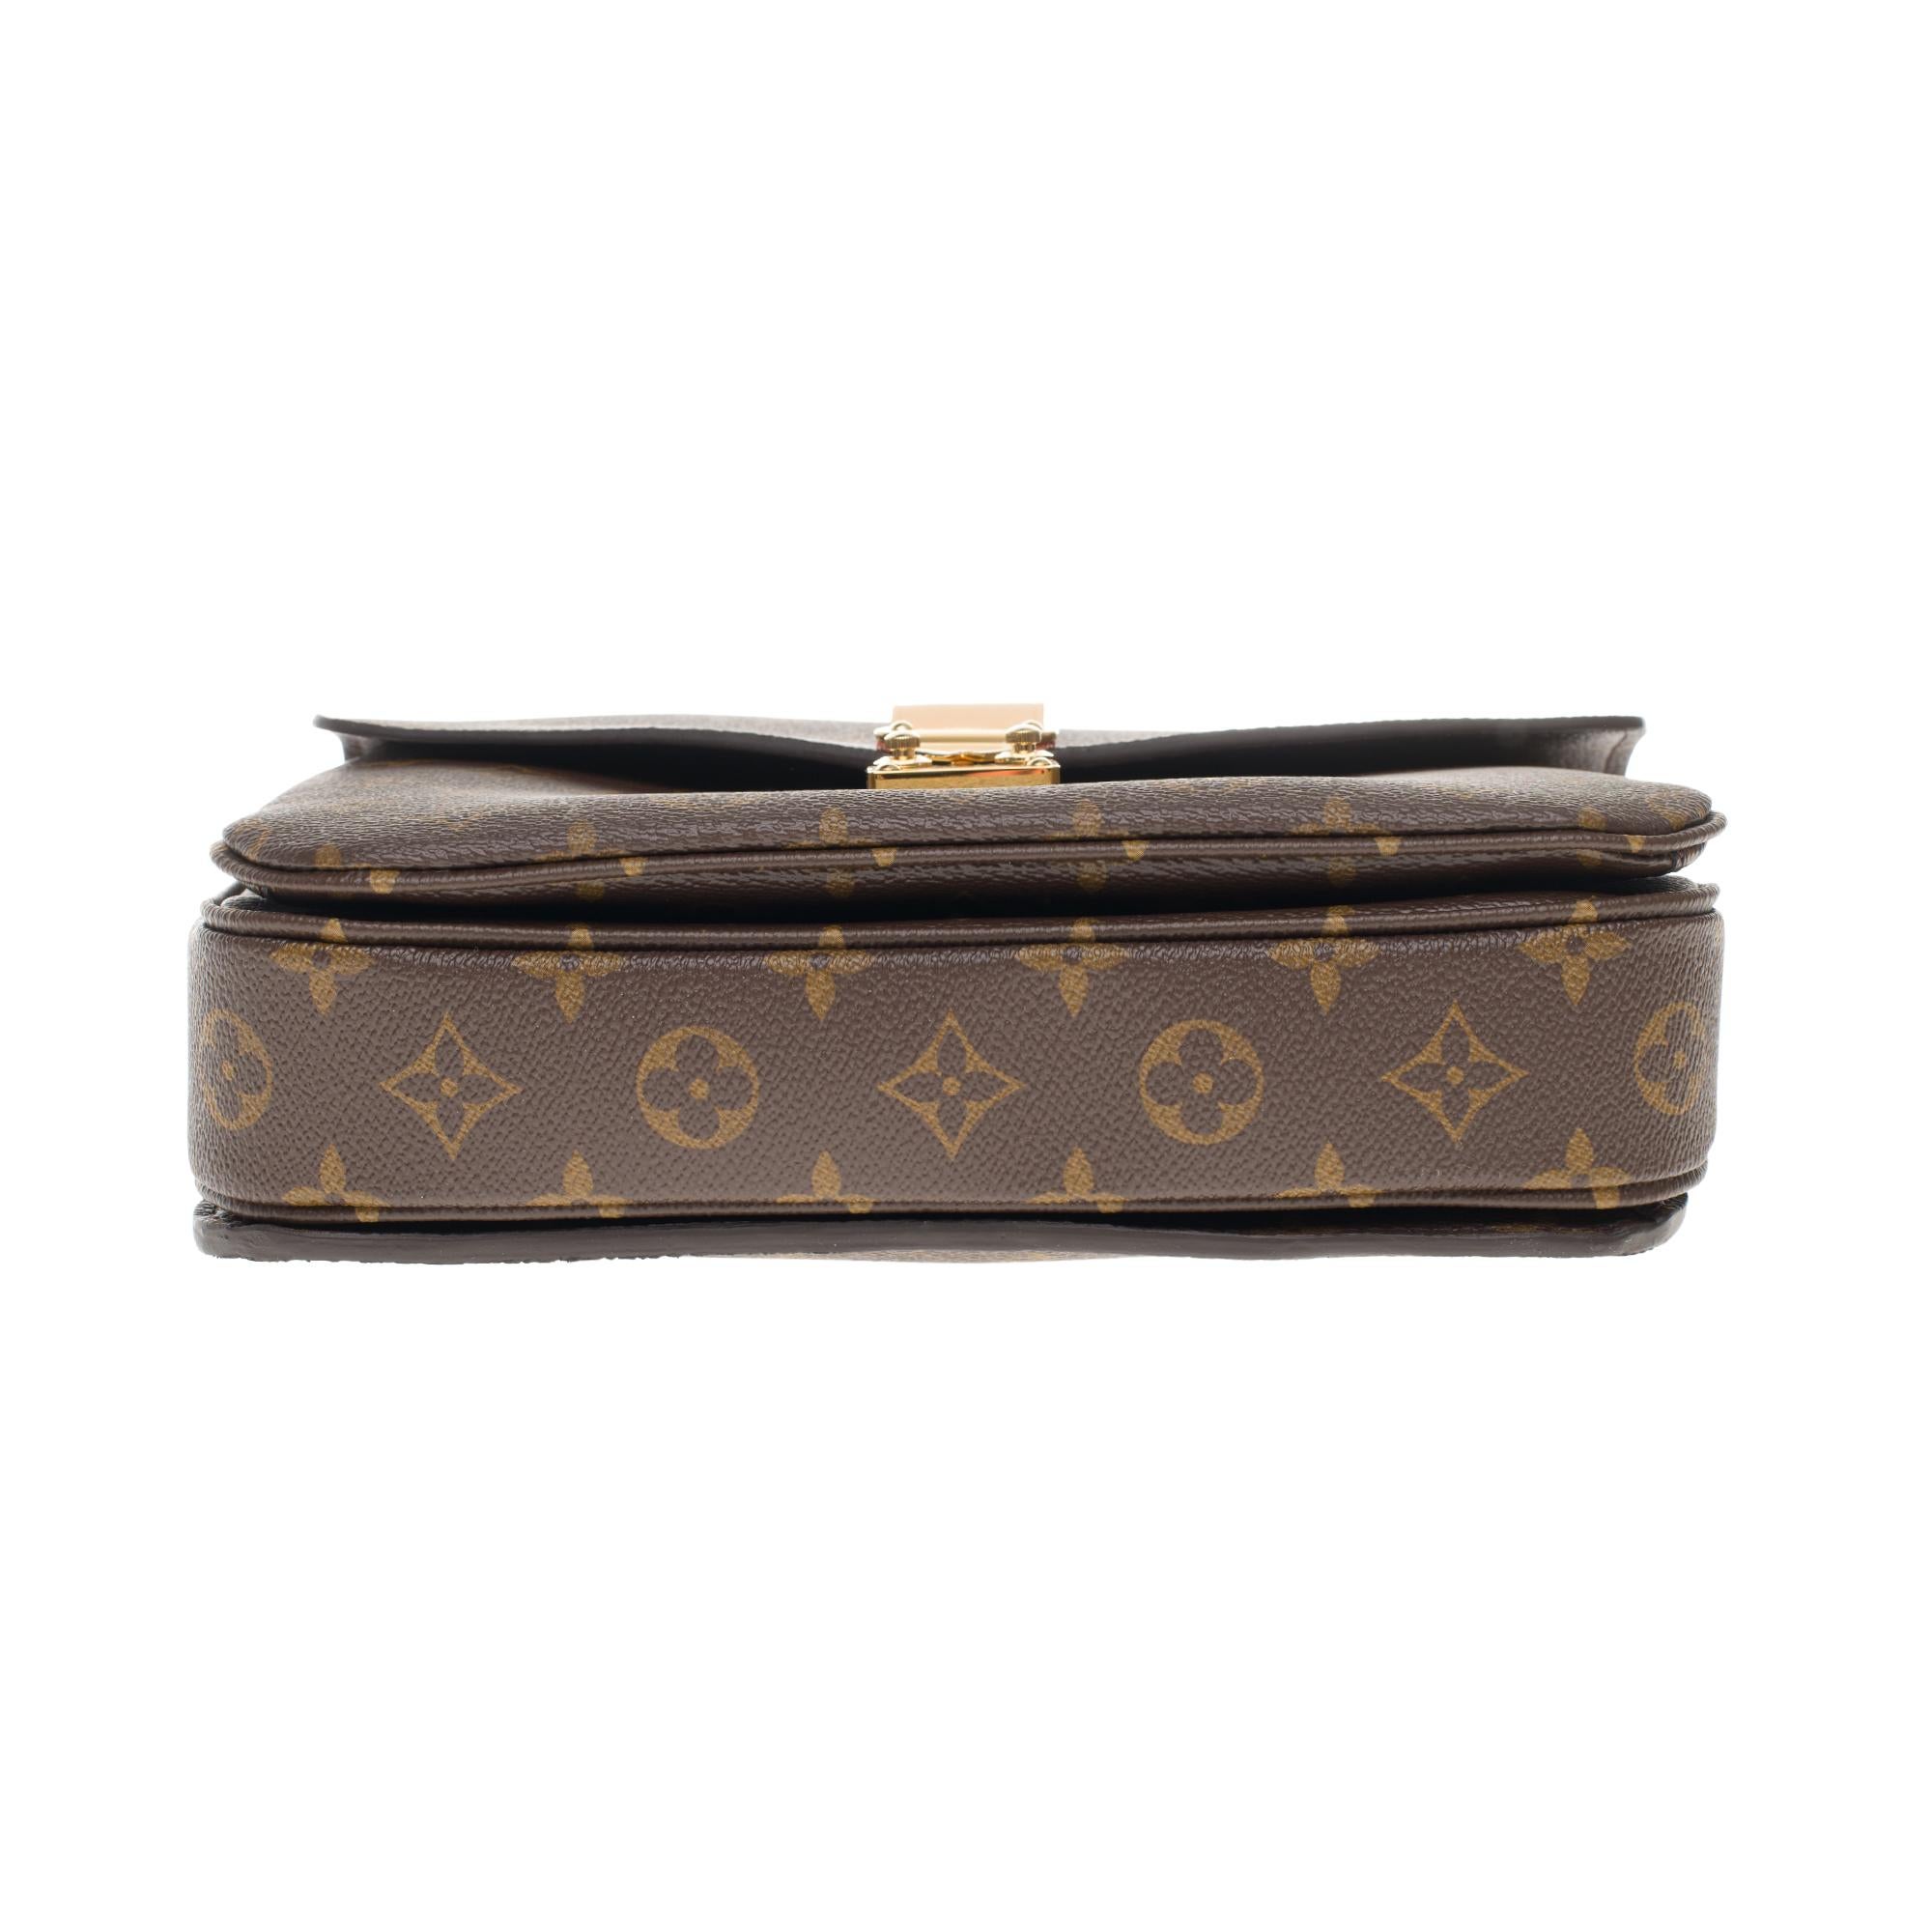 Brand New -The Must have Louis Vuitton Metis Shoulder bag in Monogram canvas ! 3